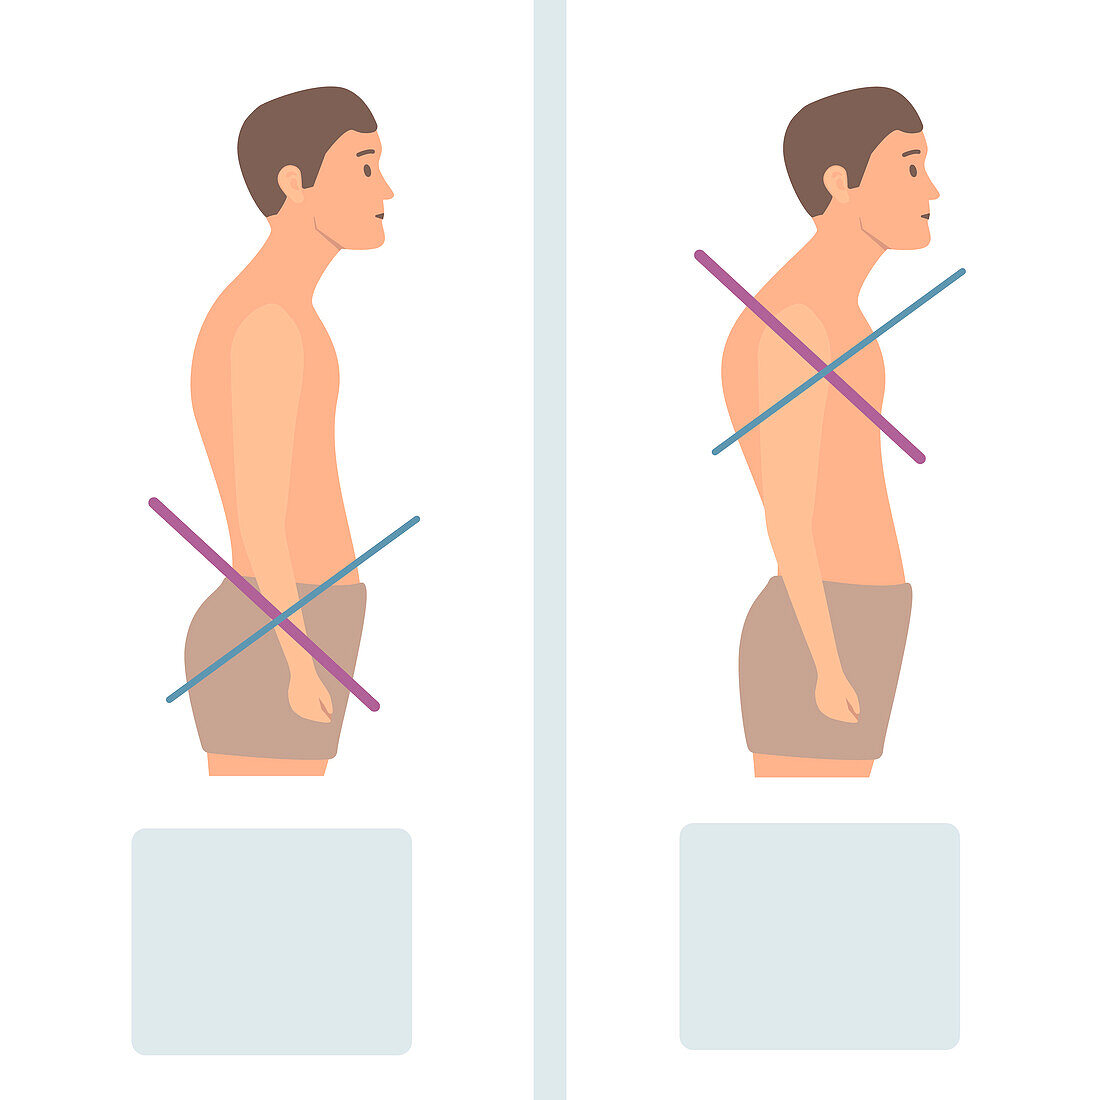 Upper and lower crossed syndromes, conceptual illustration